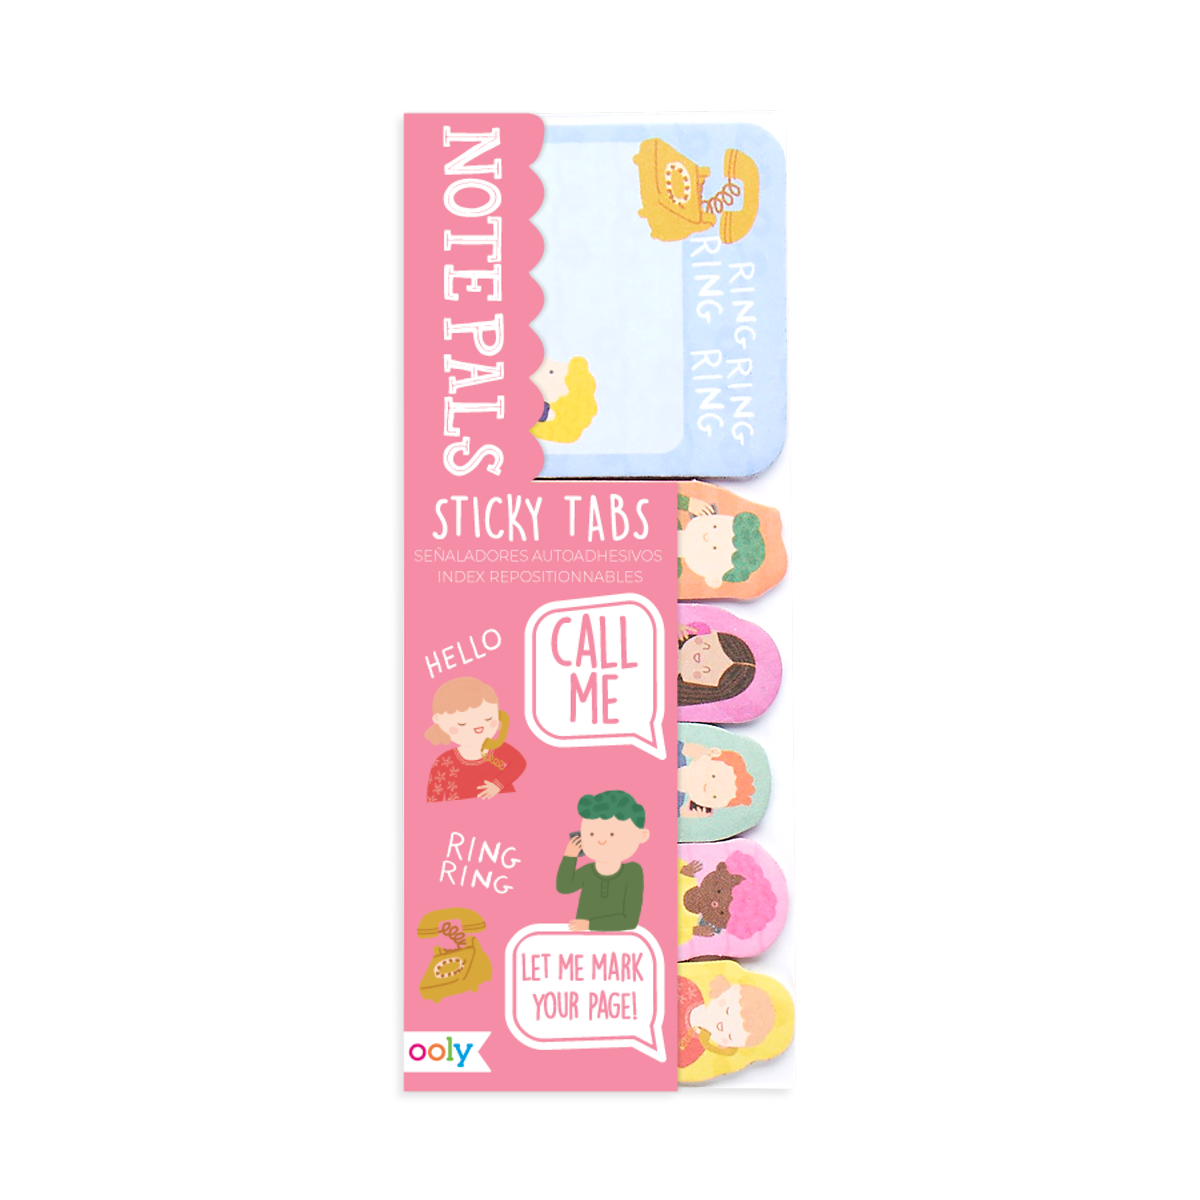 OOLY Note Pals Sticky Tabs - Call Me in packaging